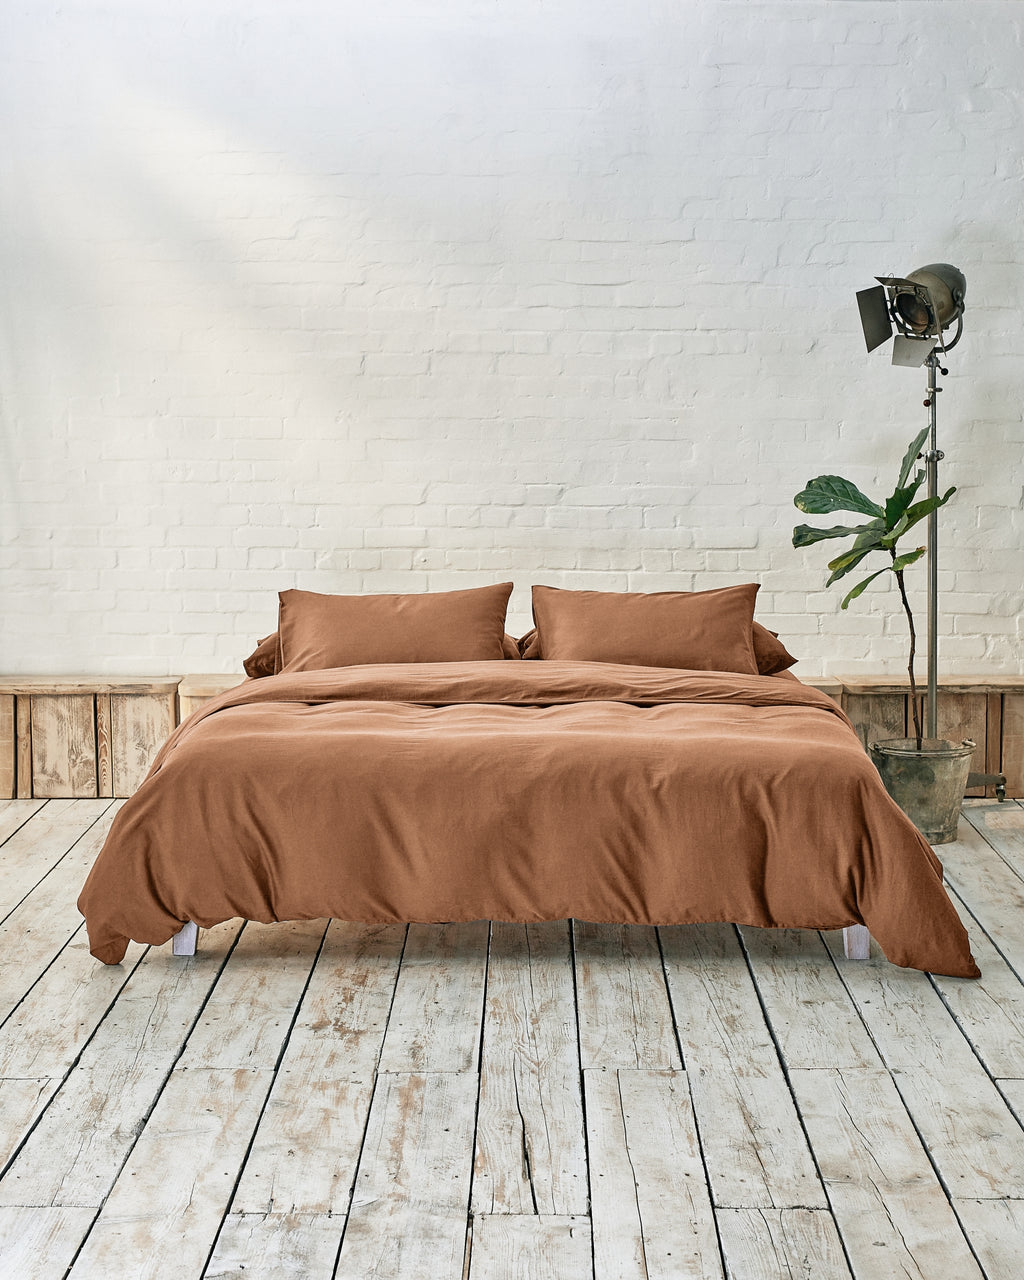 lifestyle image of caramel brown bedding in a modern bedroom with rustic wood floors and white walls.